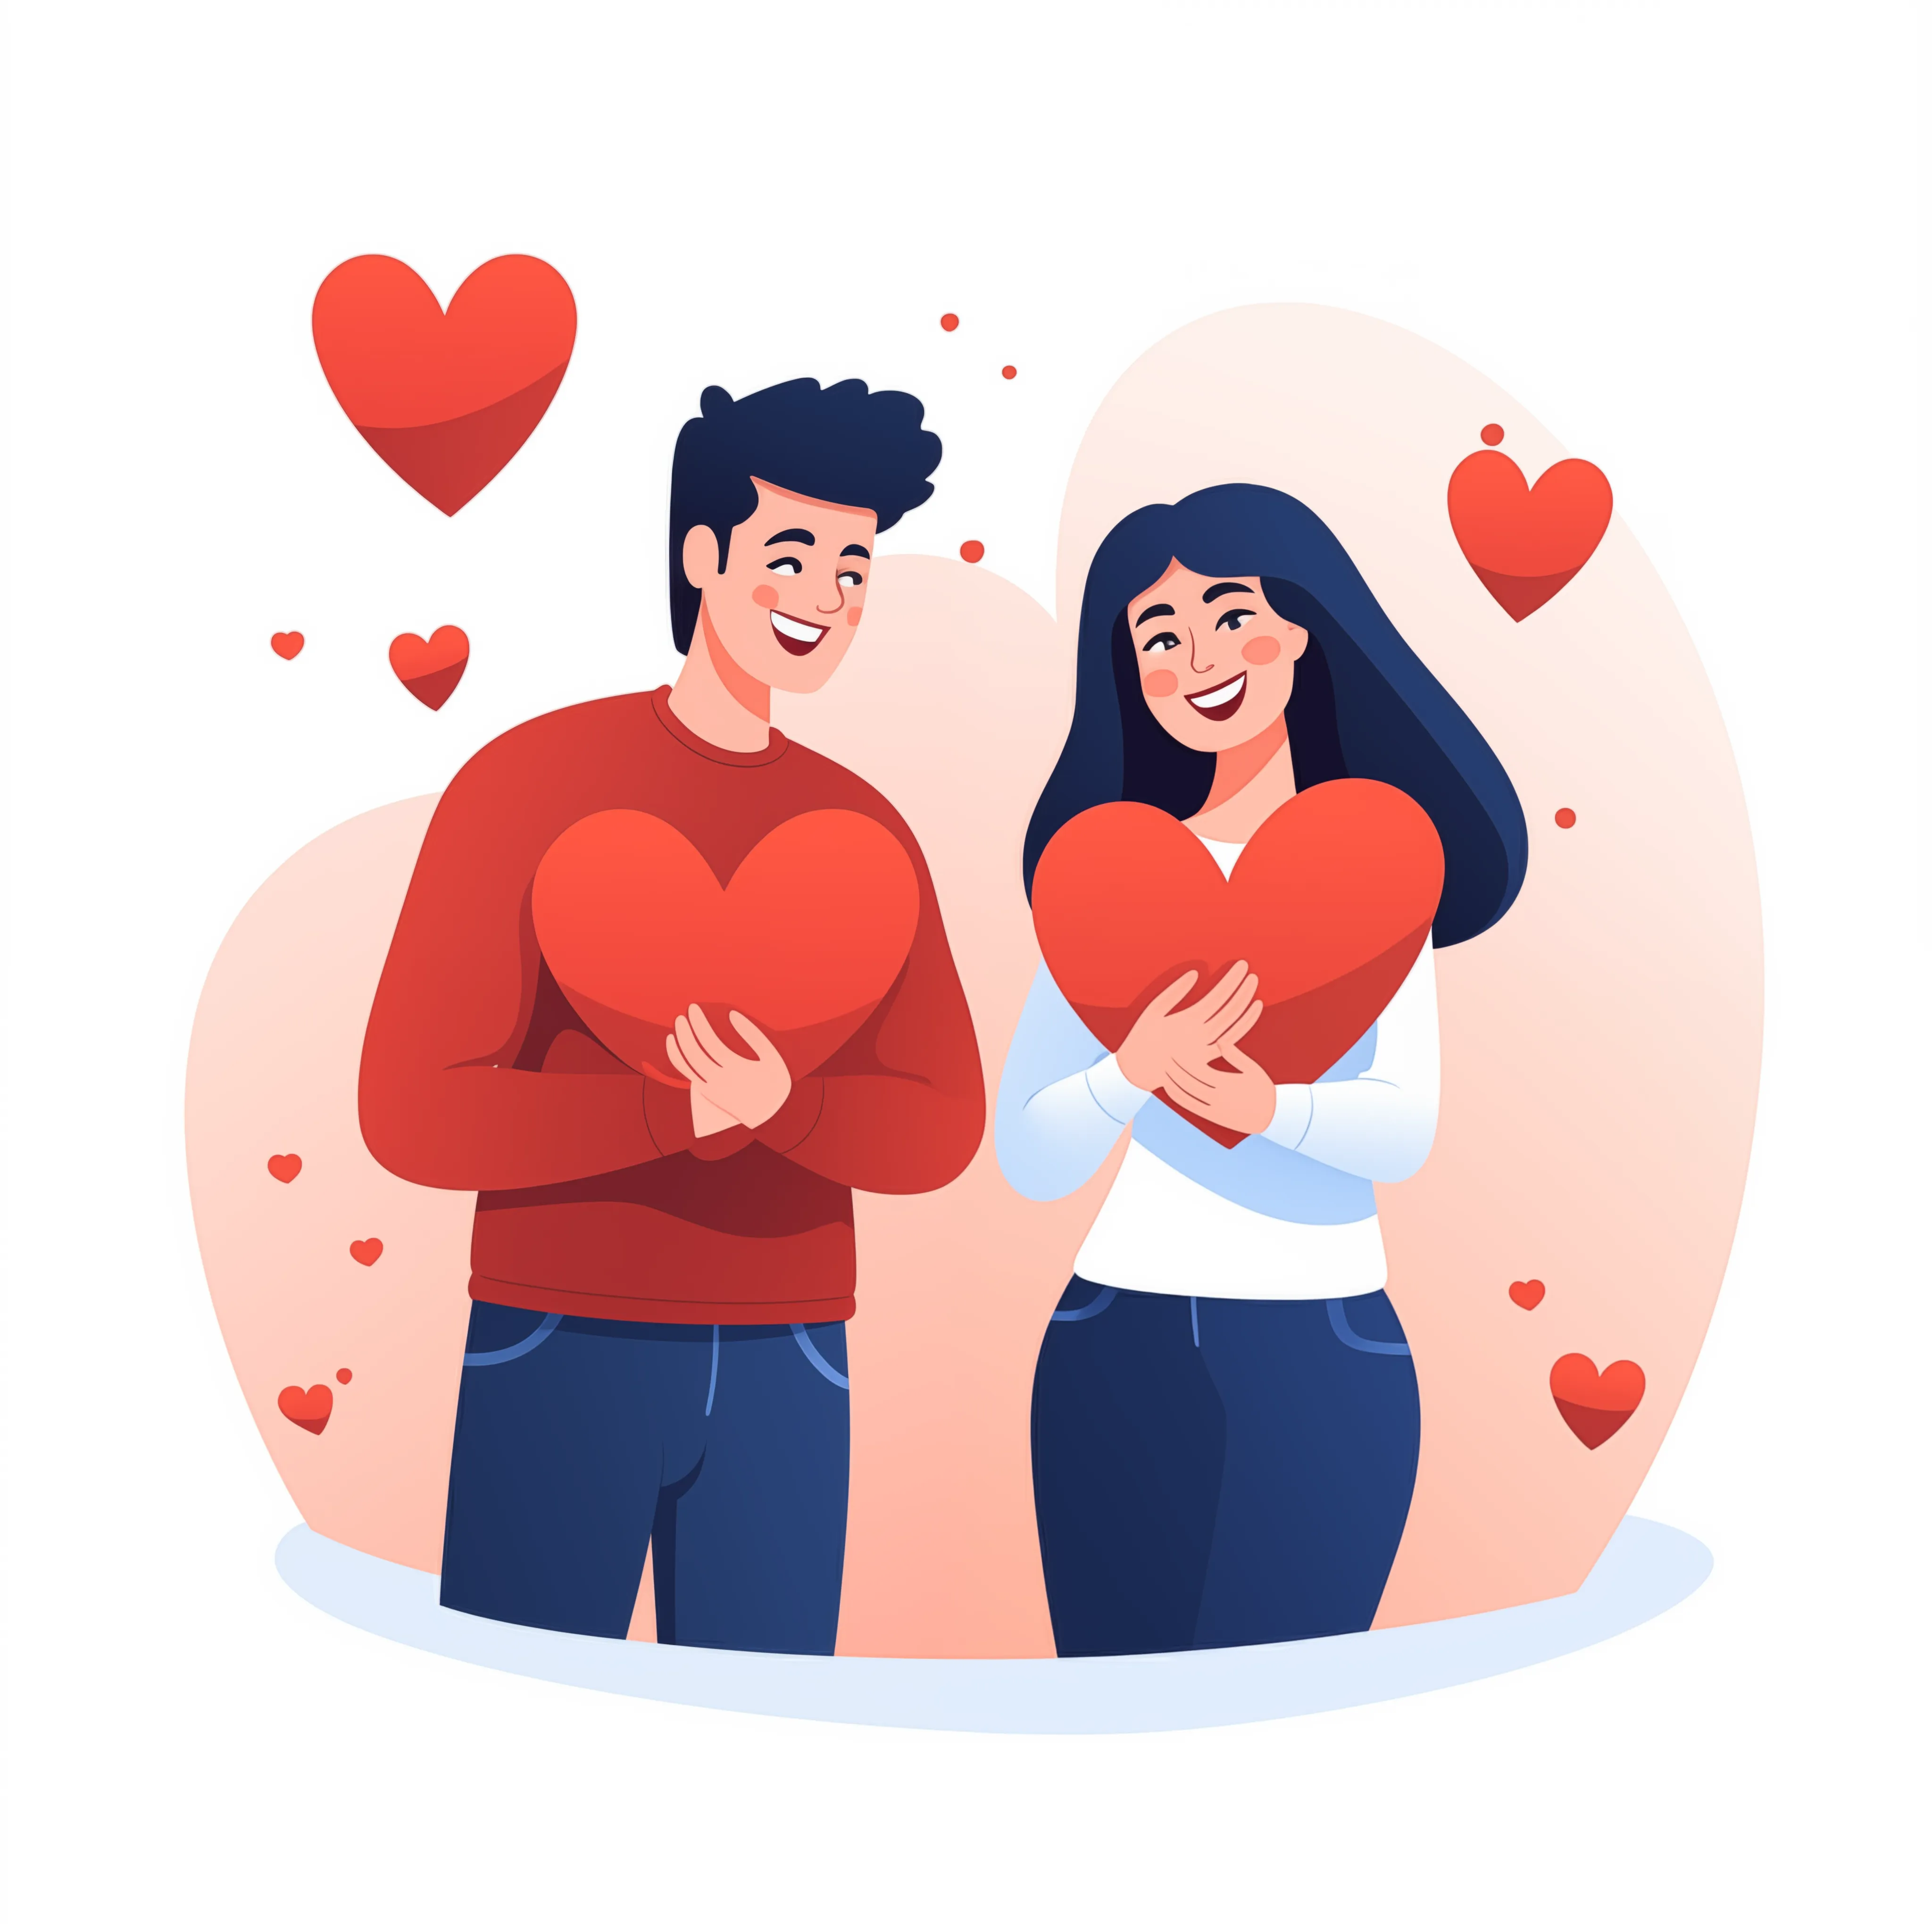 Hugs and hearts abound on Flingster, where connections blossom from the first flirty text. Matching here feels as sweet as candy, with chatmates eager to express care.